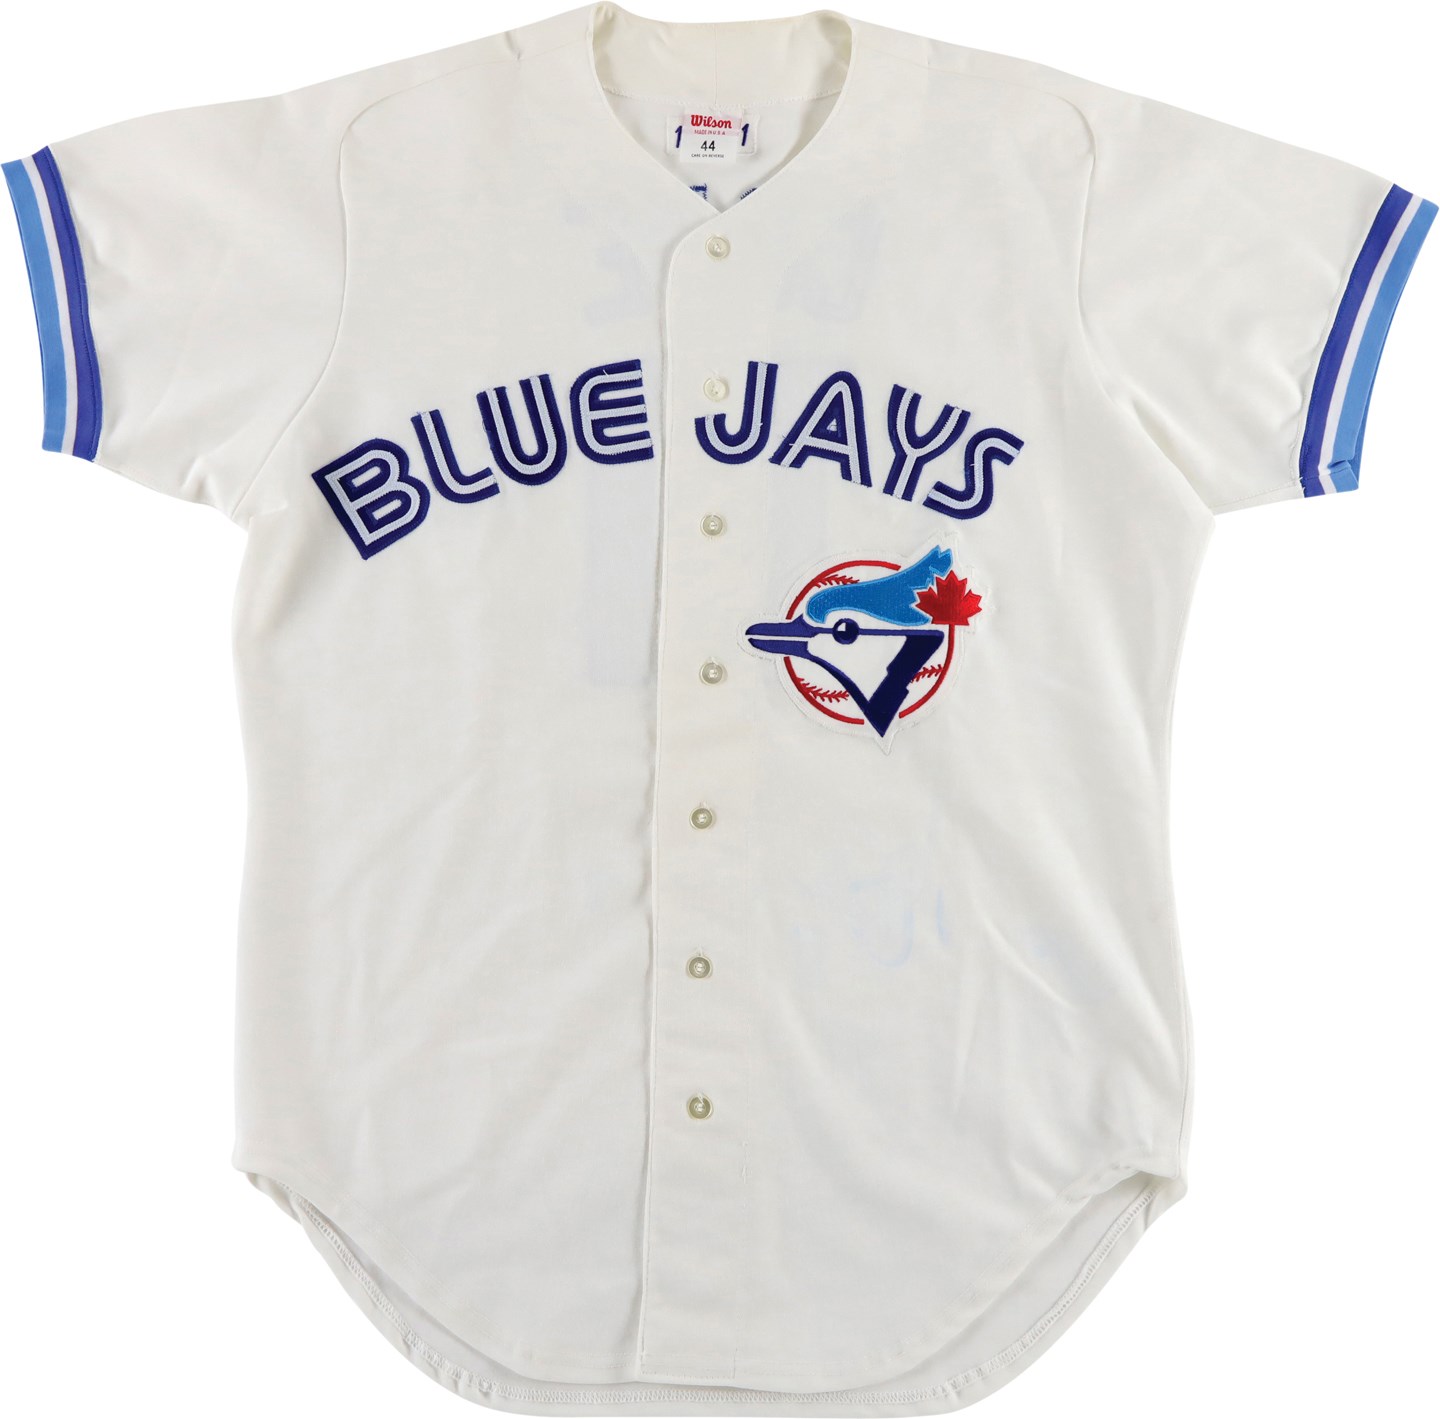 Baseball Equipment - 1995 David Cone Toronto Blue Jays Signed Game Worn Jersey Given to Cito Gaston